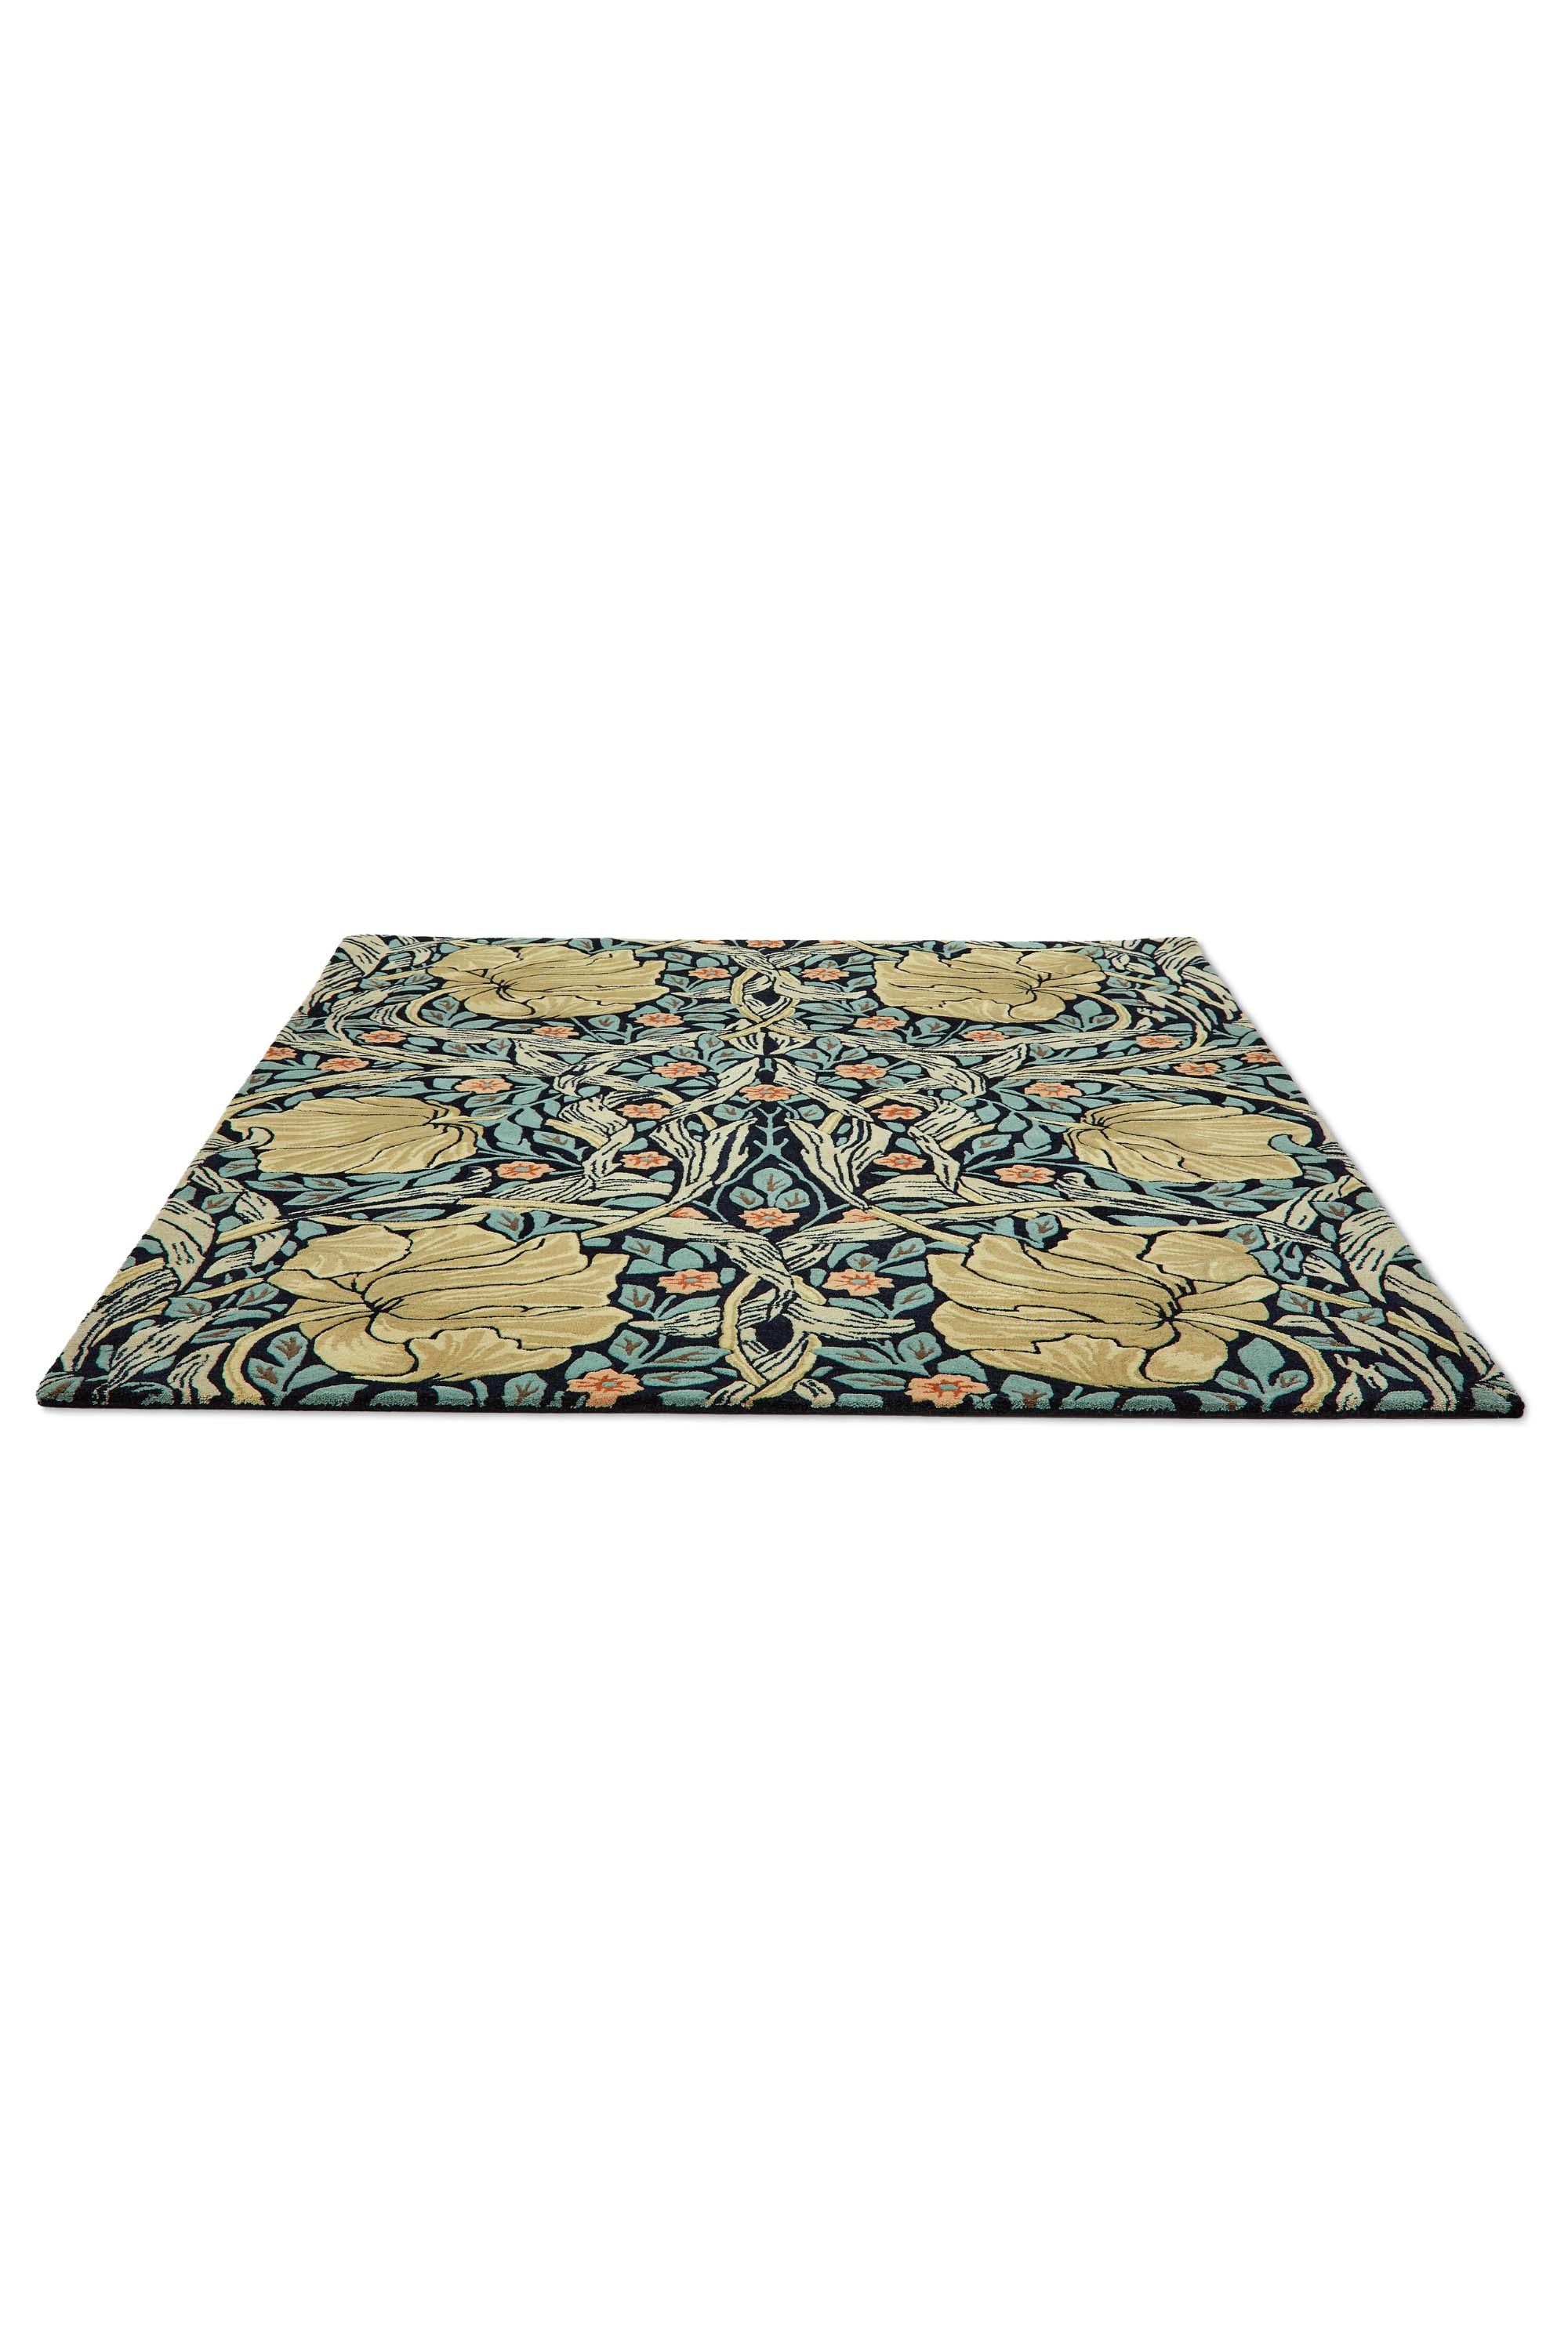 Multicolour floral abstract rug